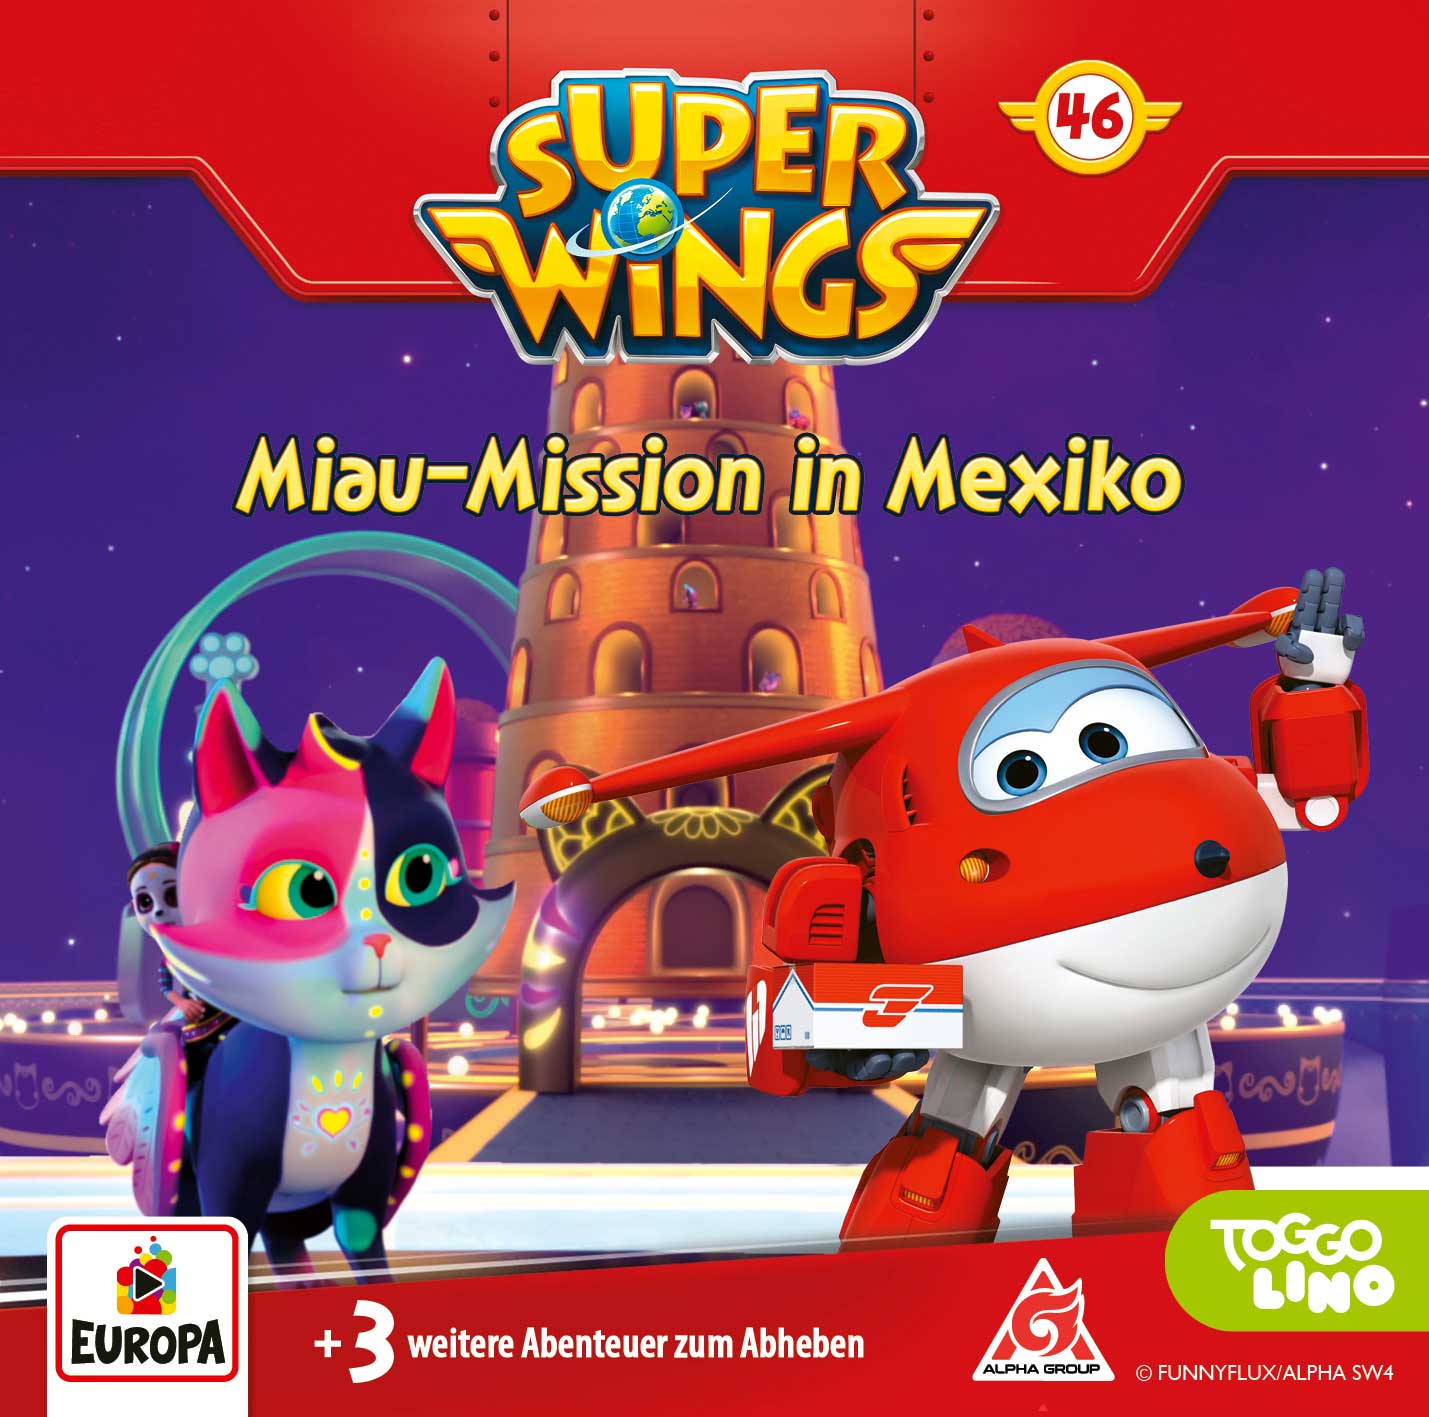 Super Wings: Miau-Mission in Mexiko